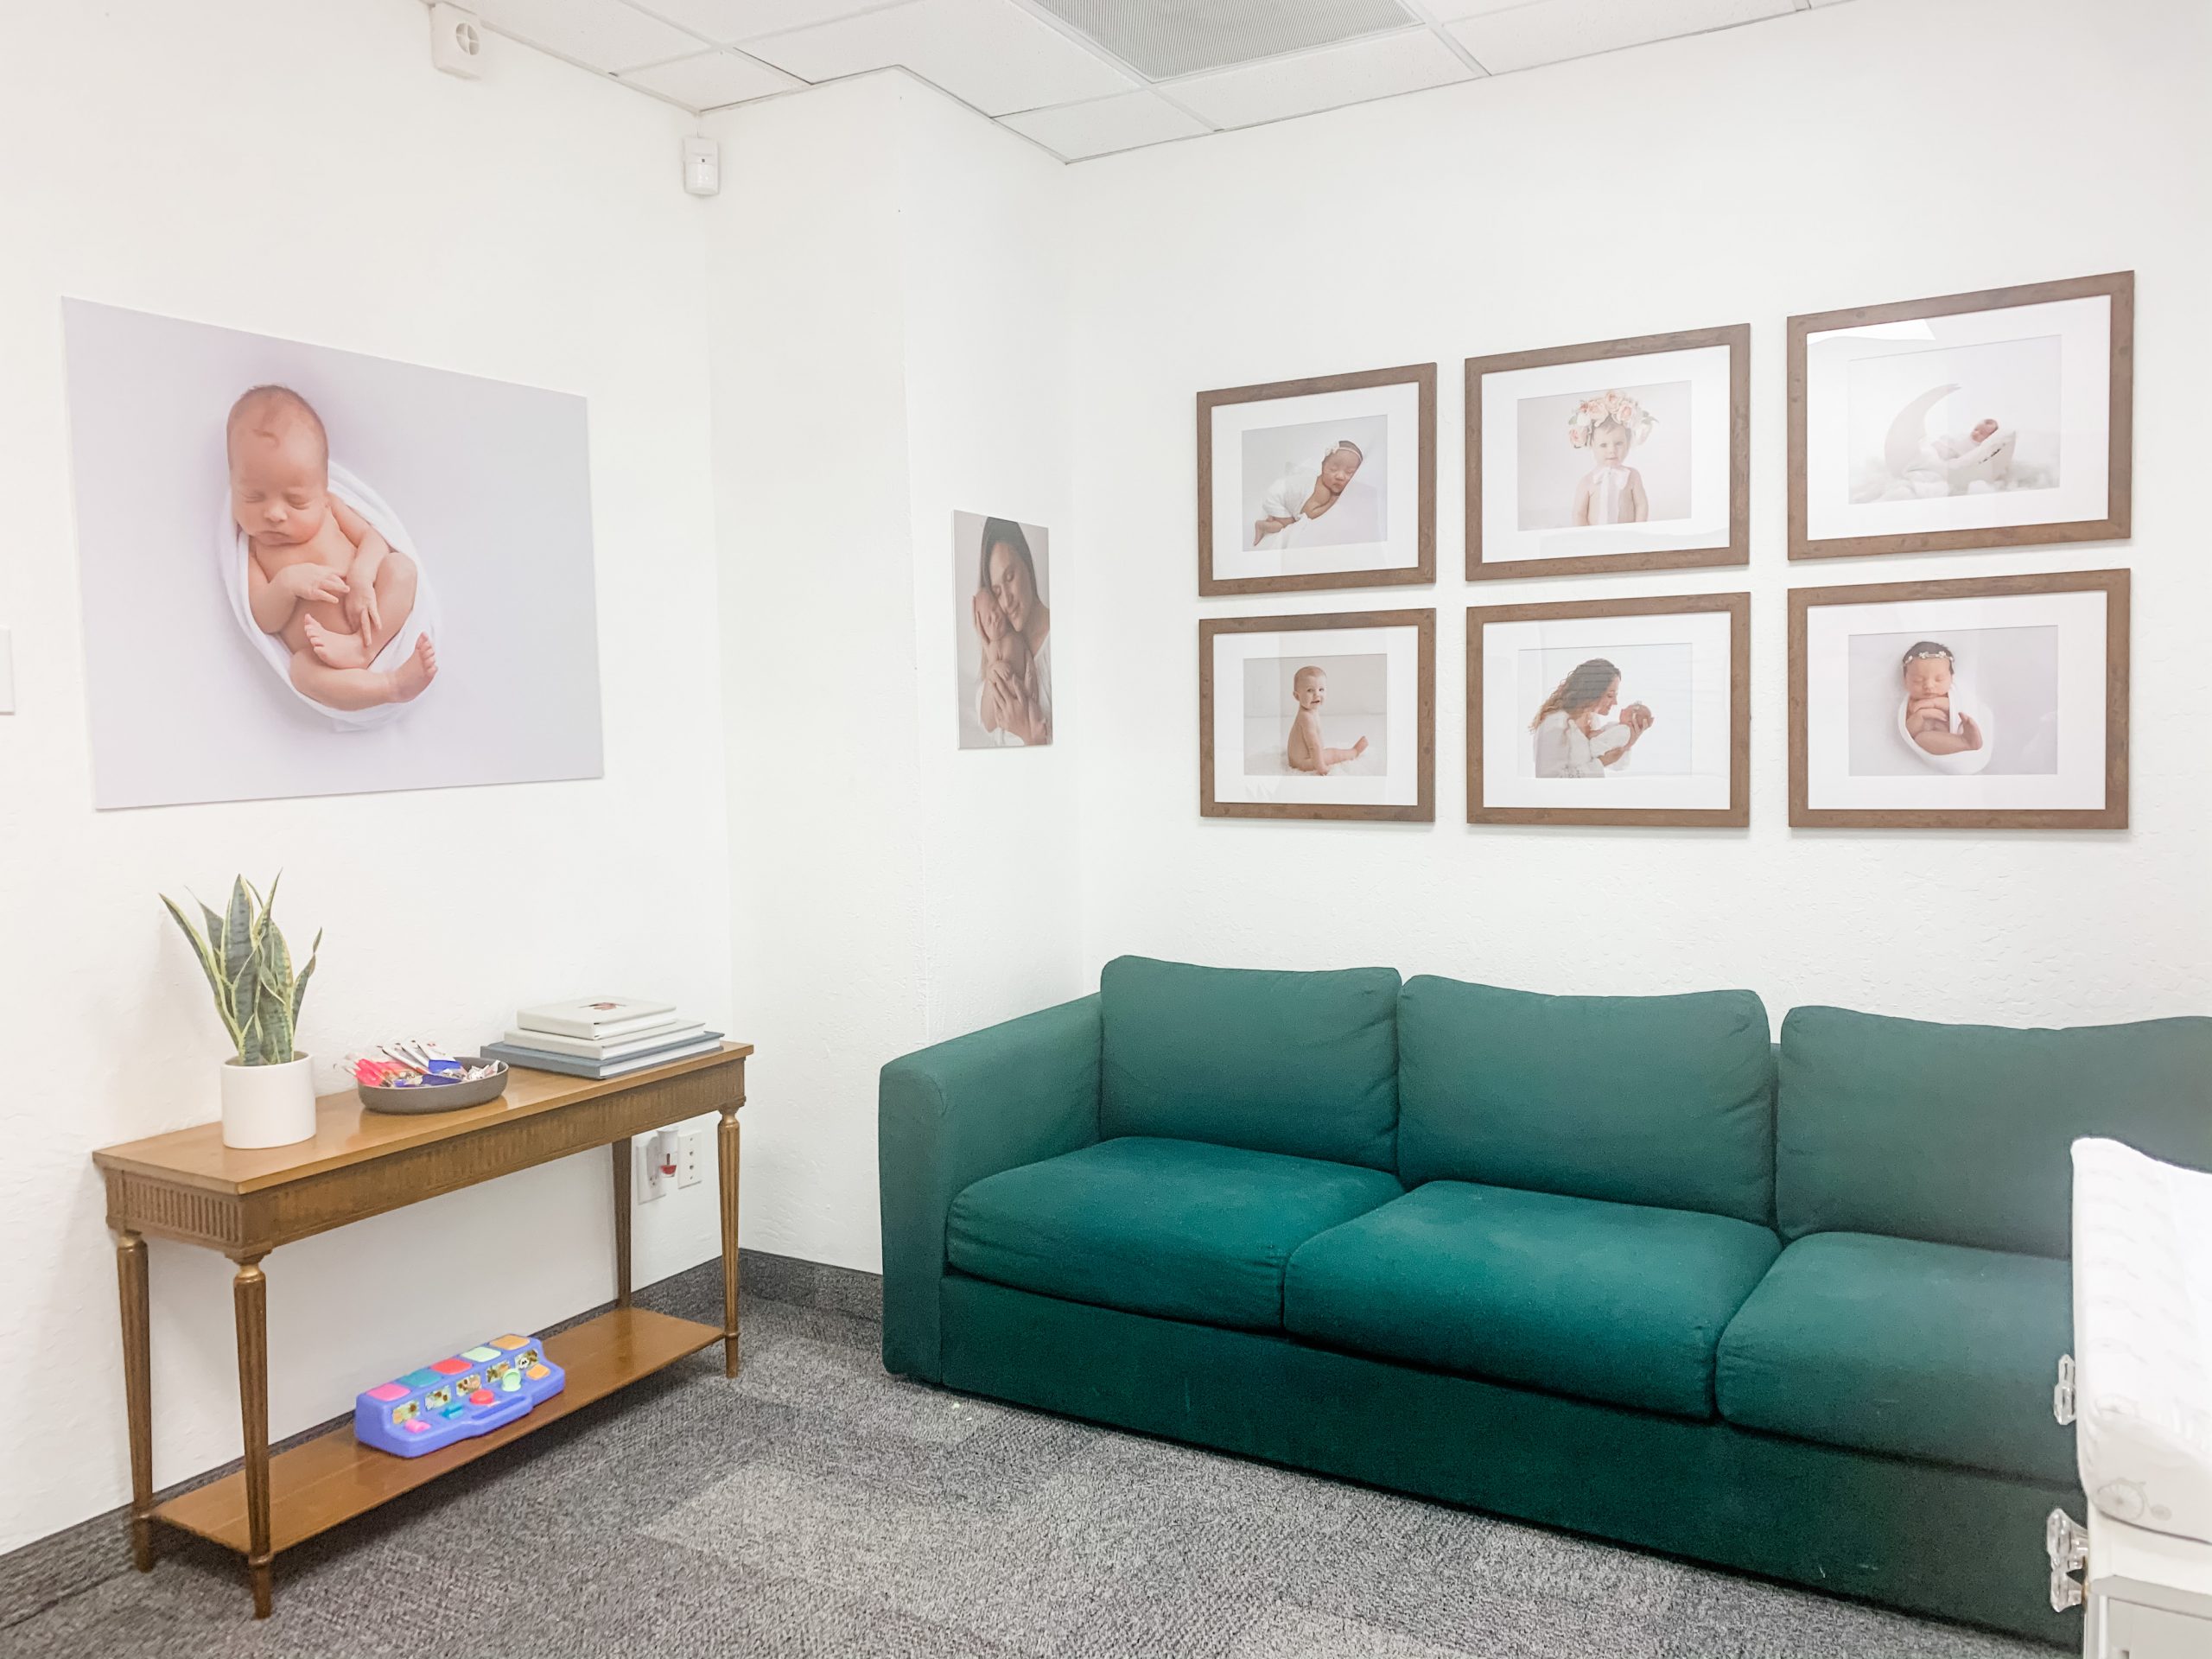 Entrance room to newborn photo studio with comfy couch